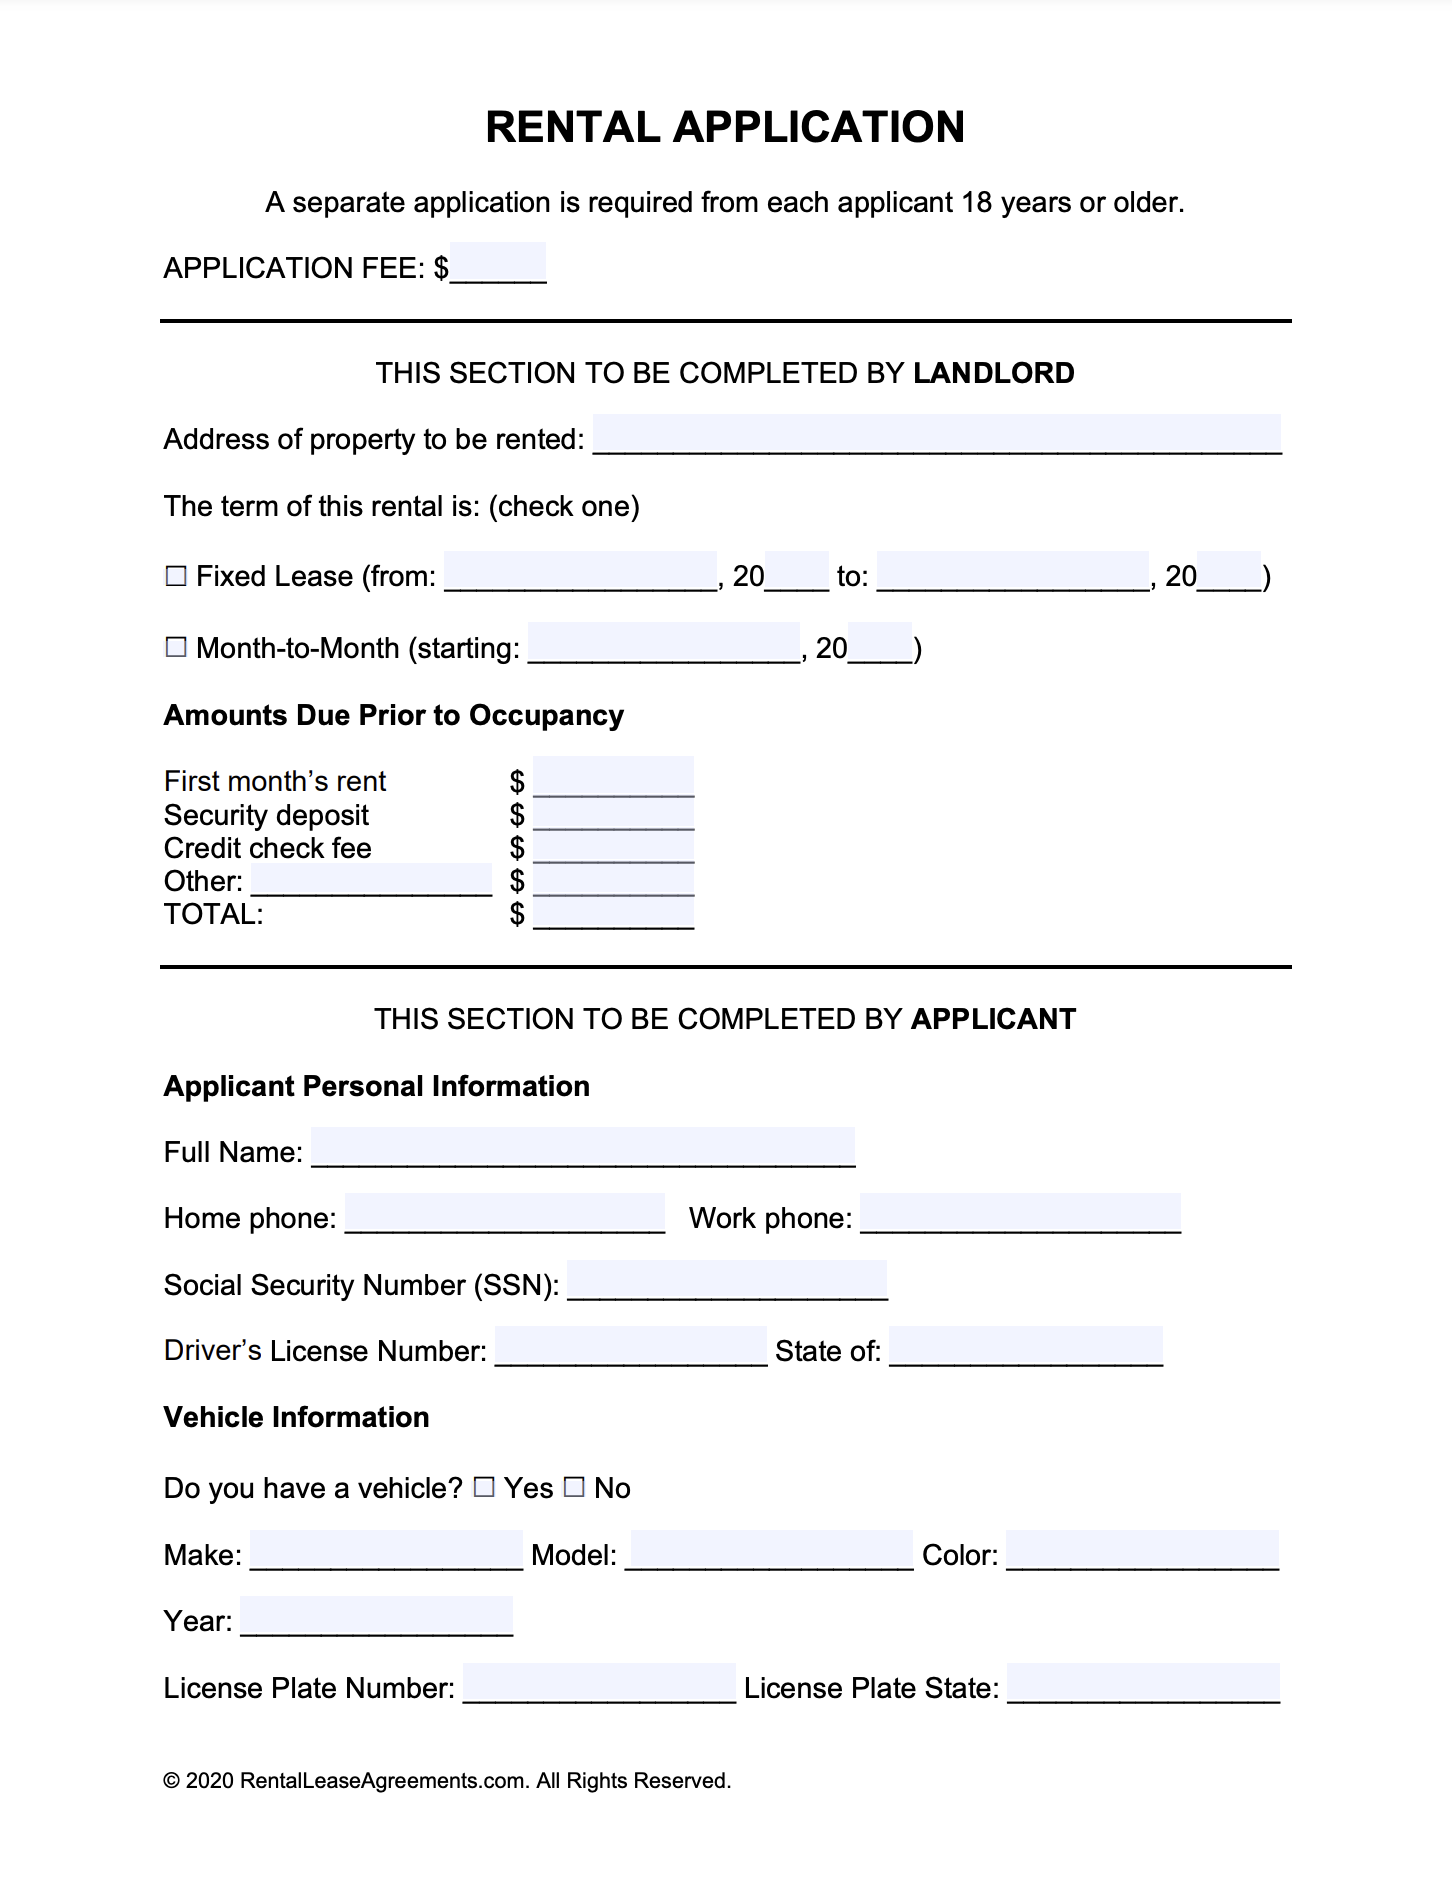 RentalLeaseAgreements.com Residential Application Form